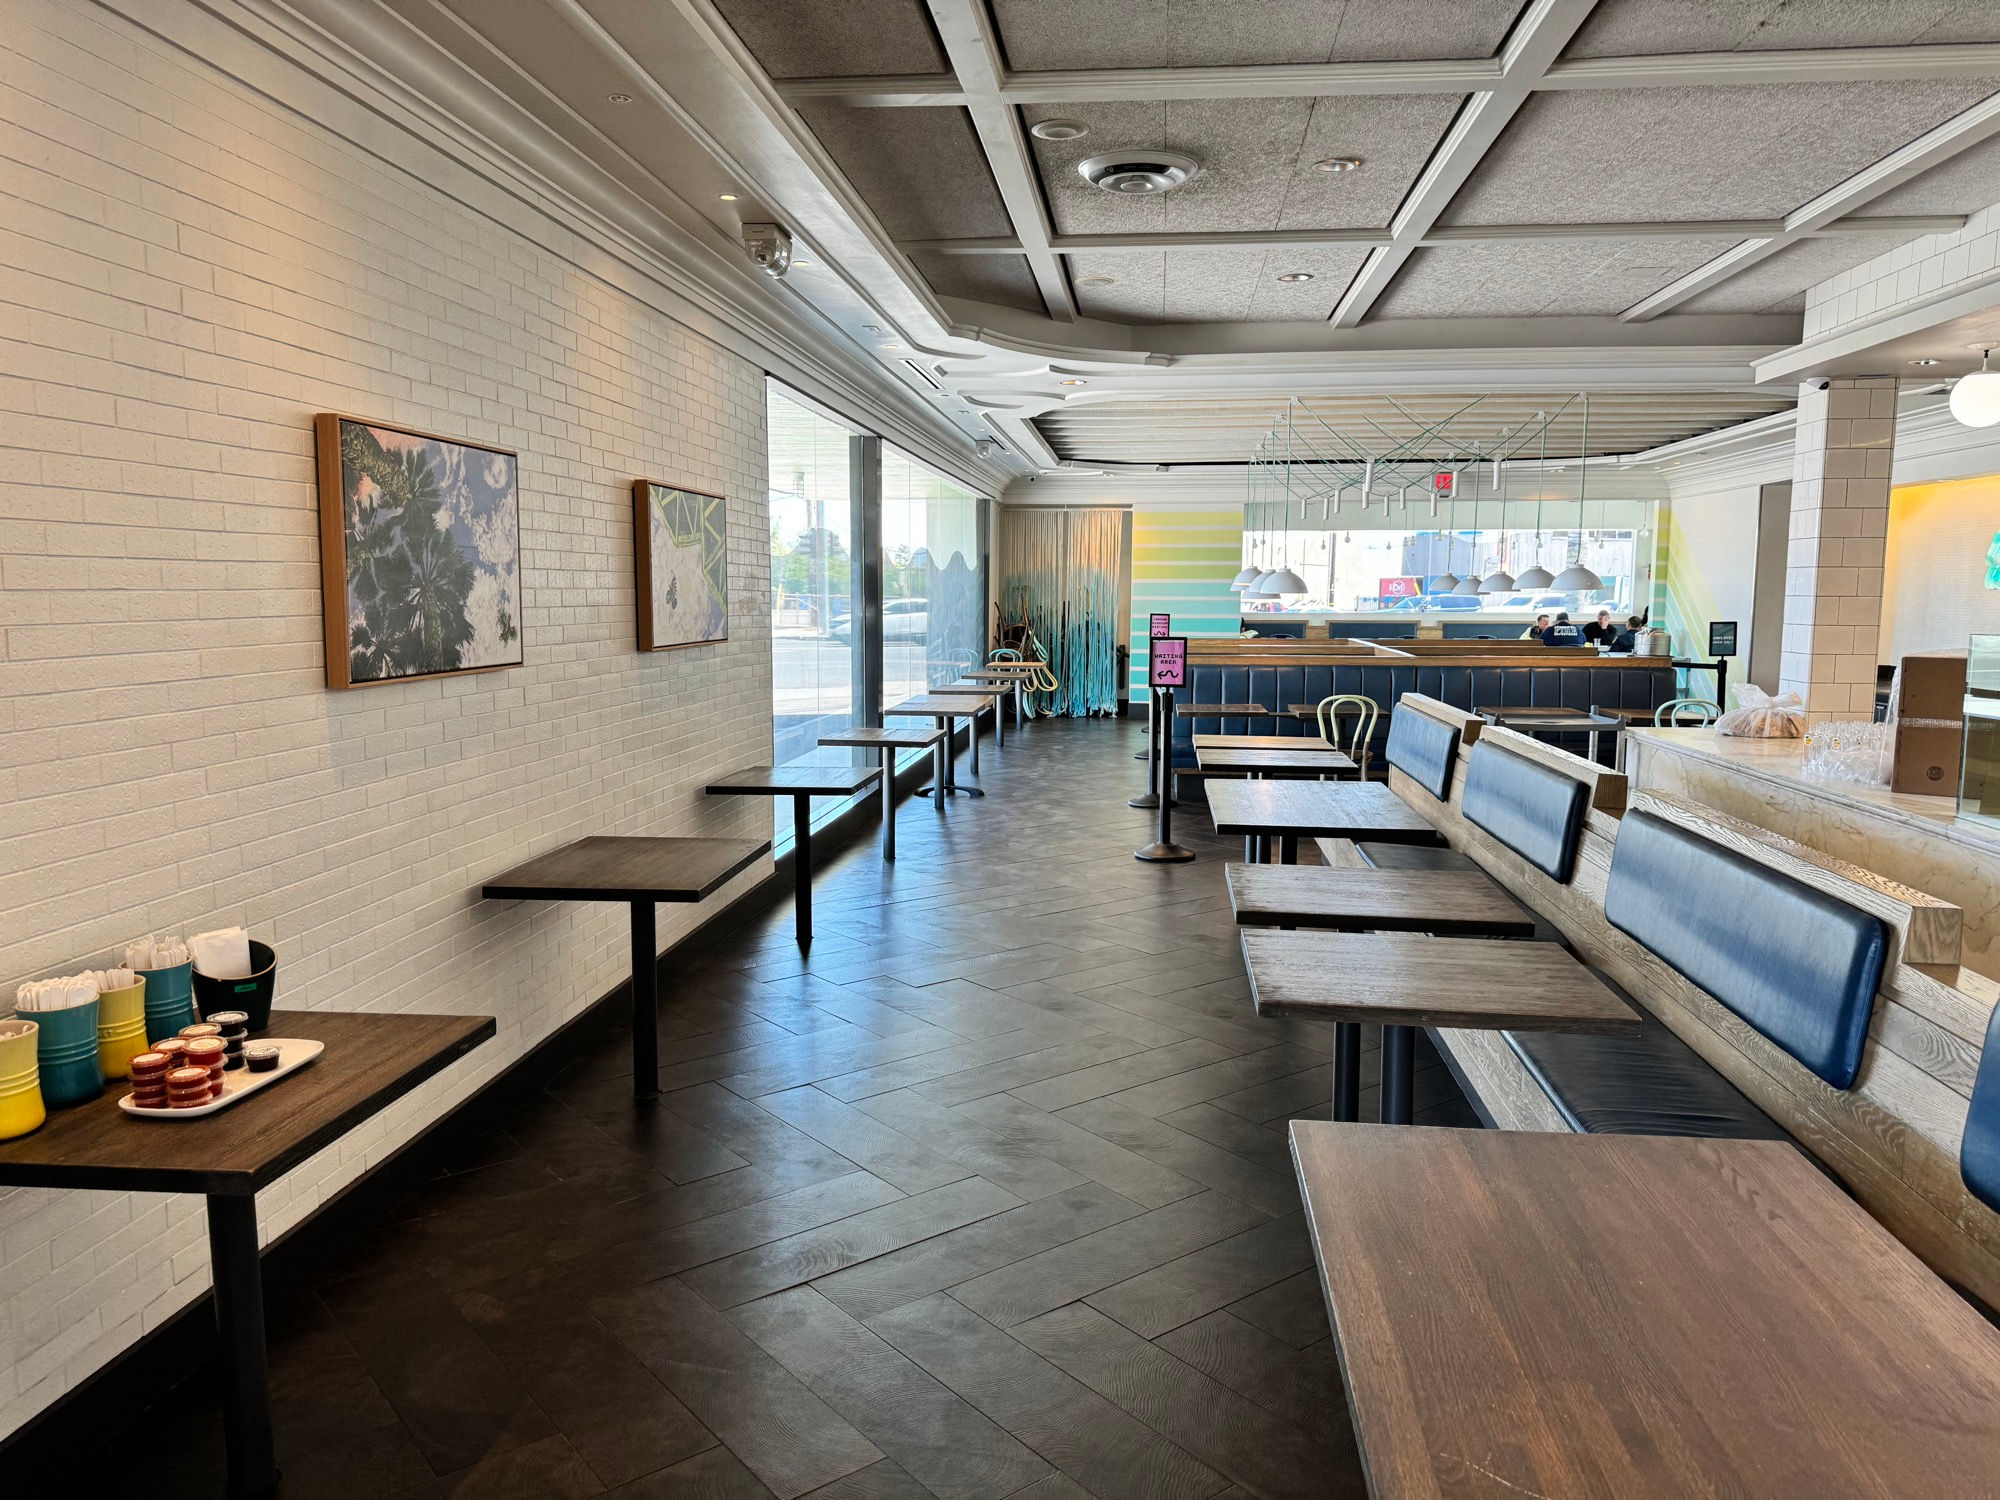 California Chicken Cafe Seating